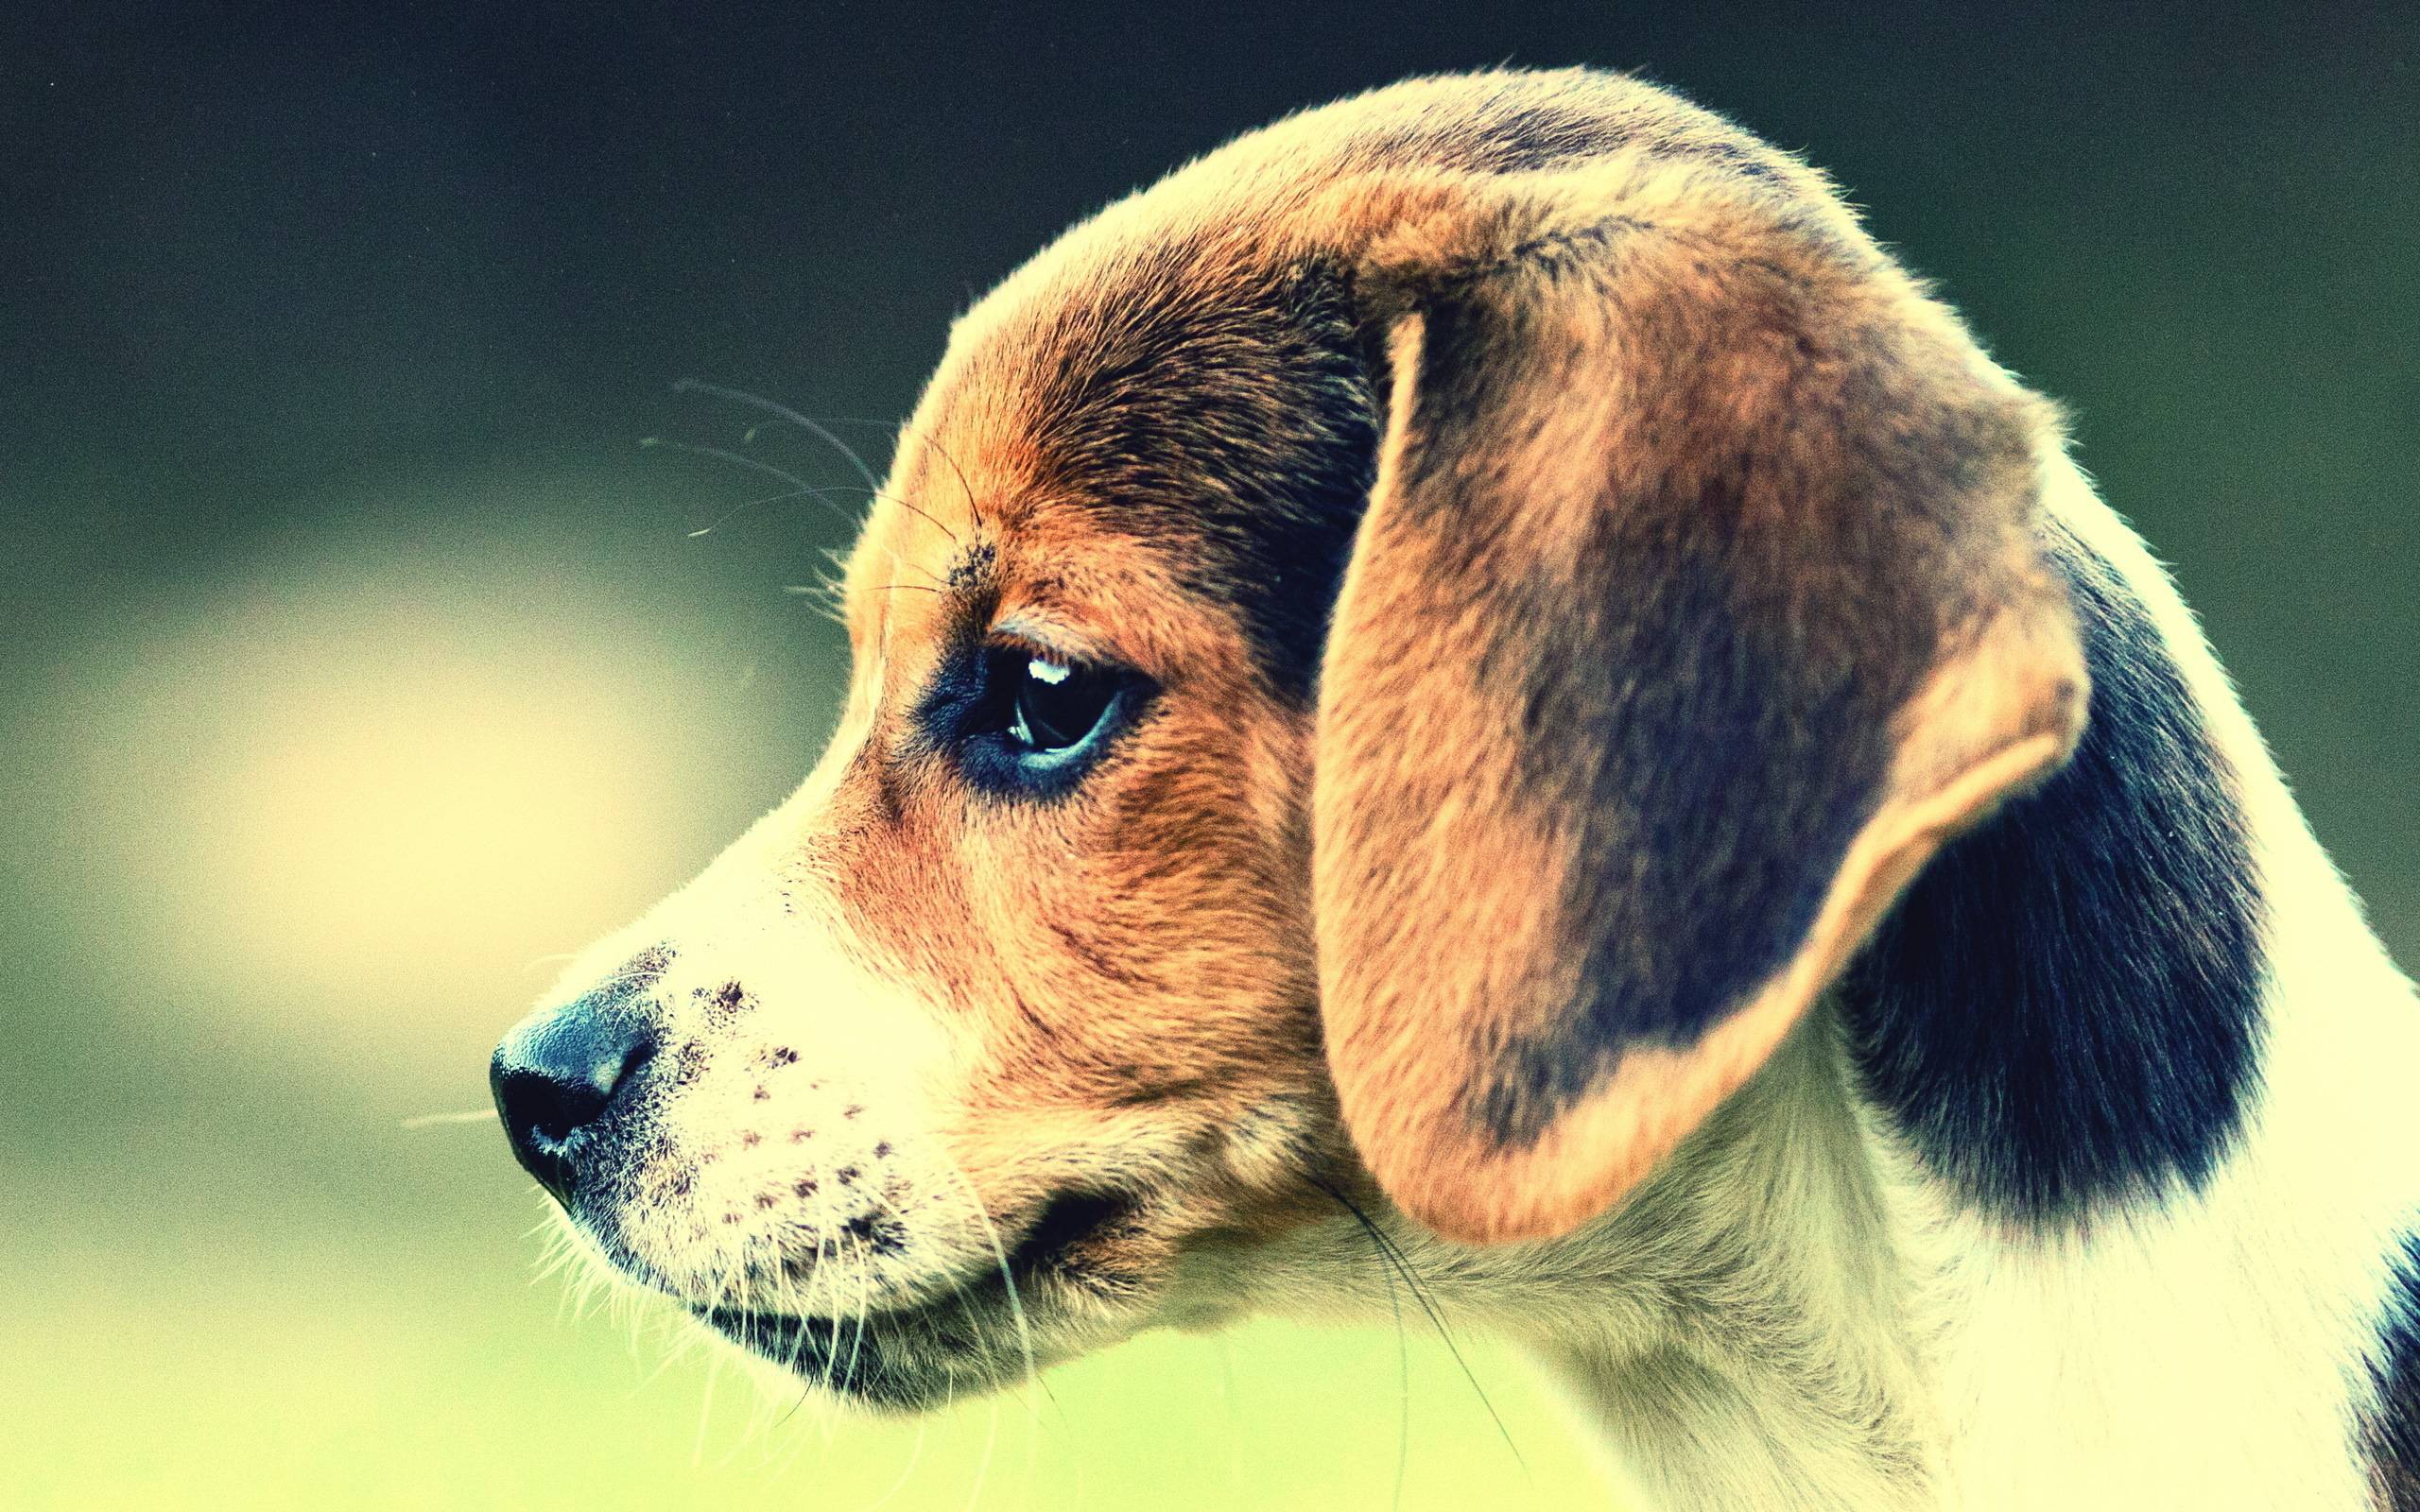 Dog Beagle wallpaper and image, picture, photo